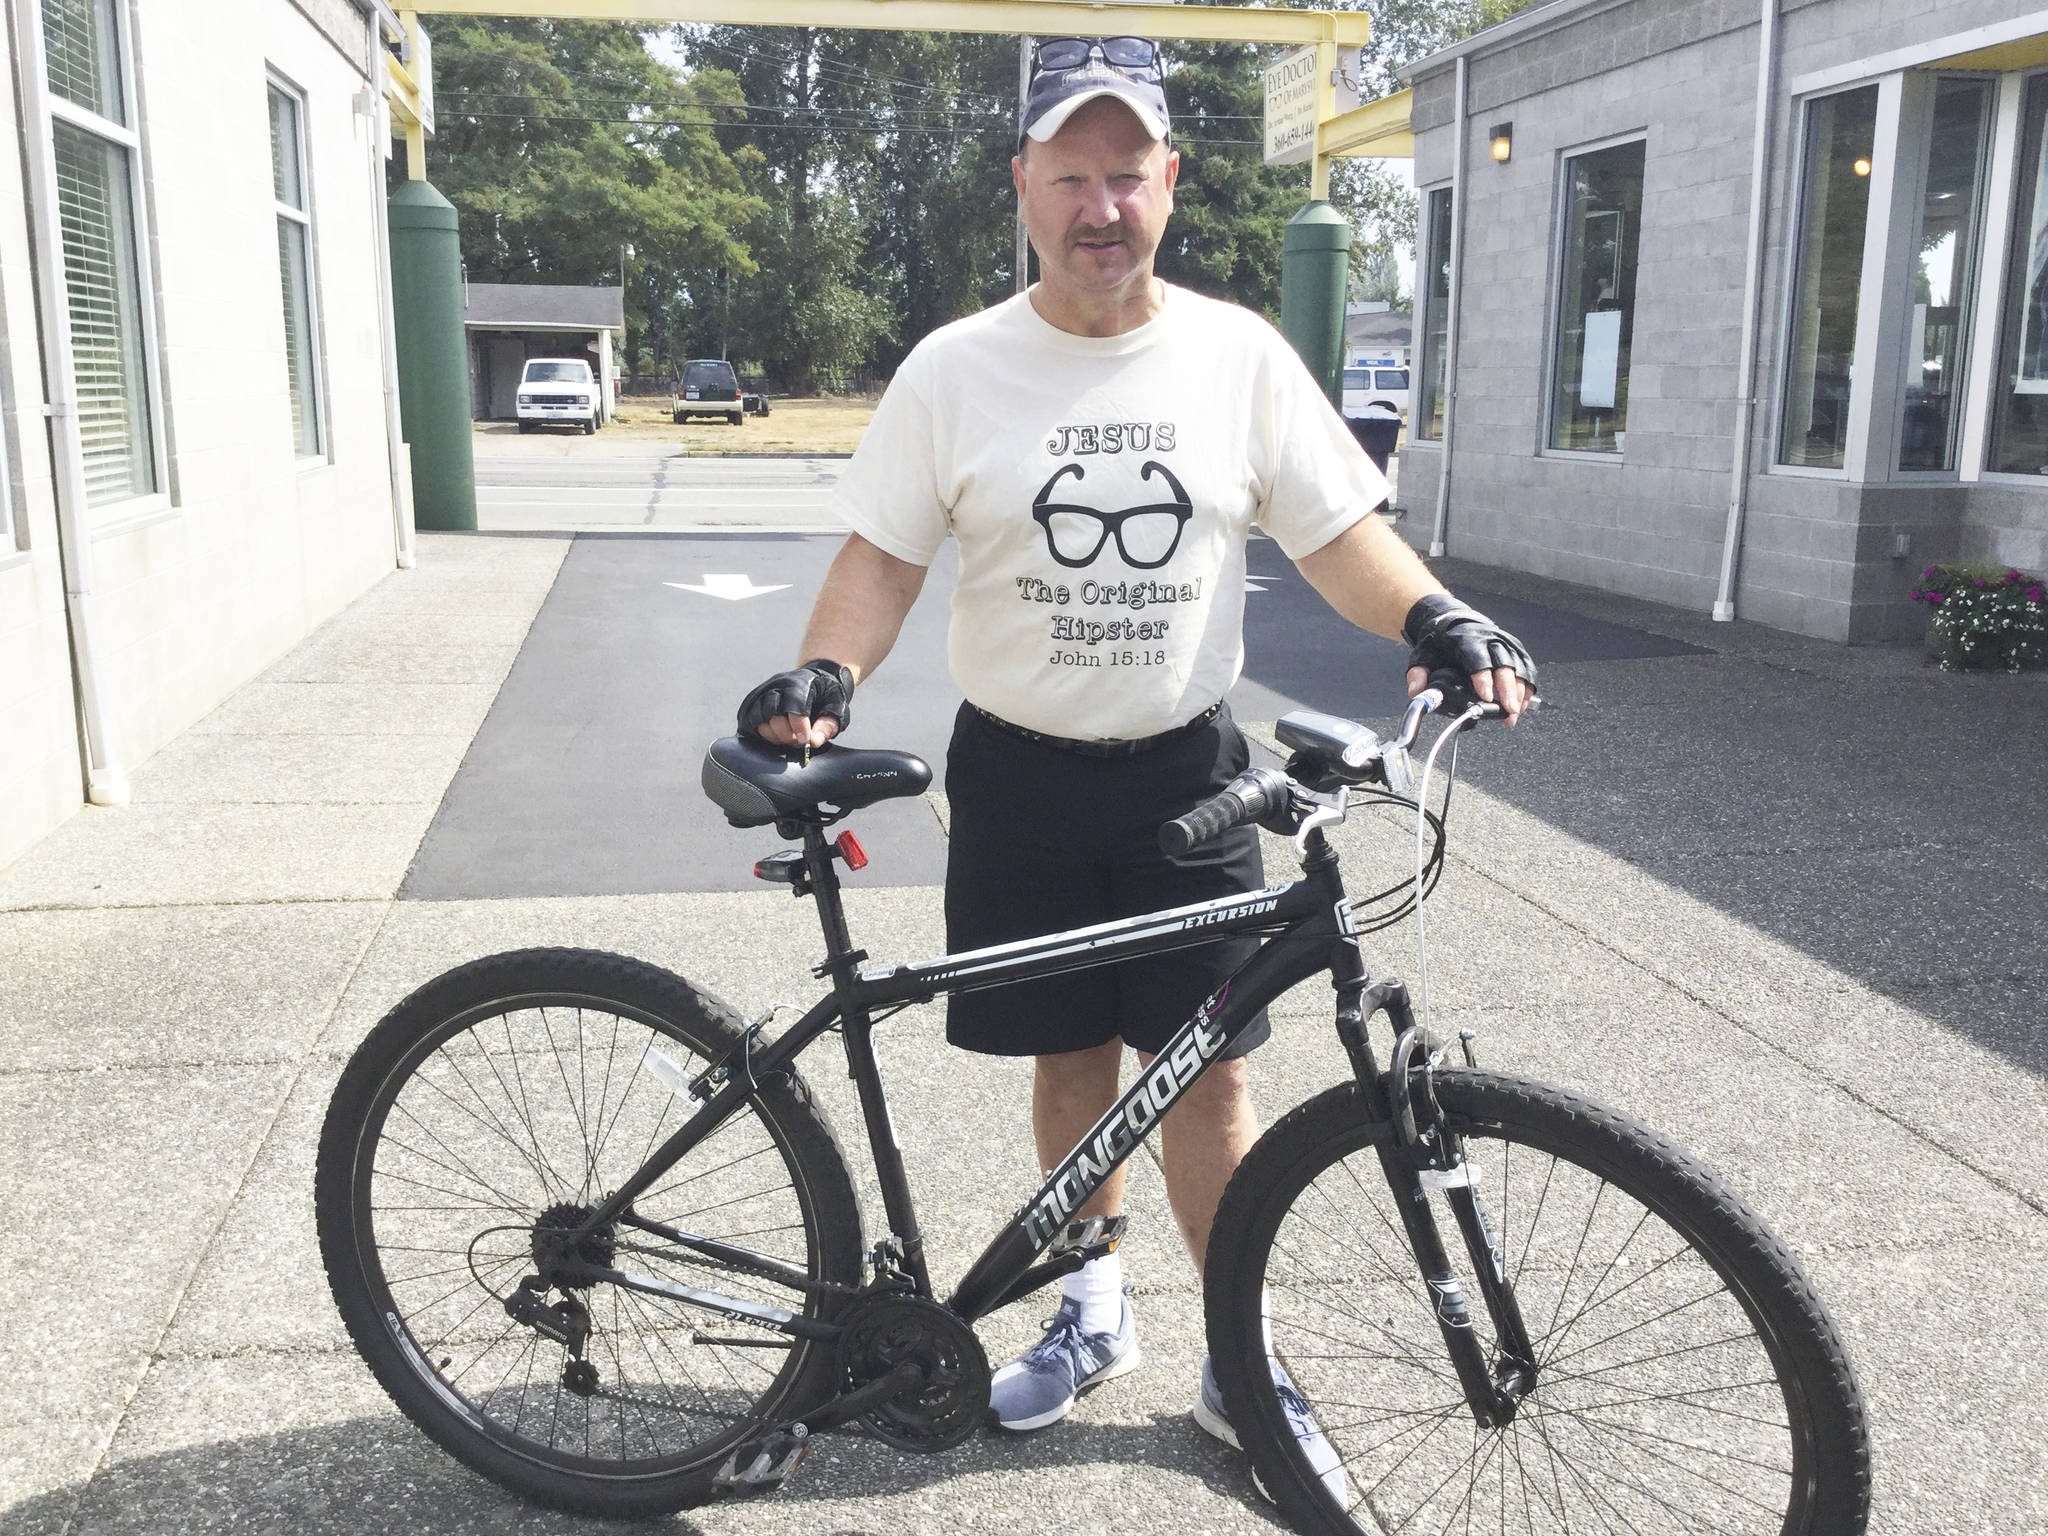 Marysville bicyclist rides on faith along Highway 99 from U.S.-Canada border to Mexico to aid street women, kids